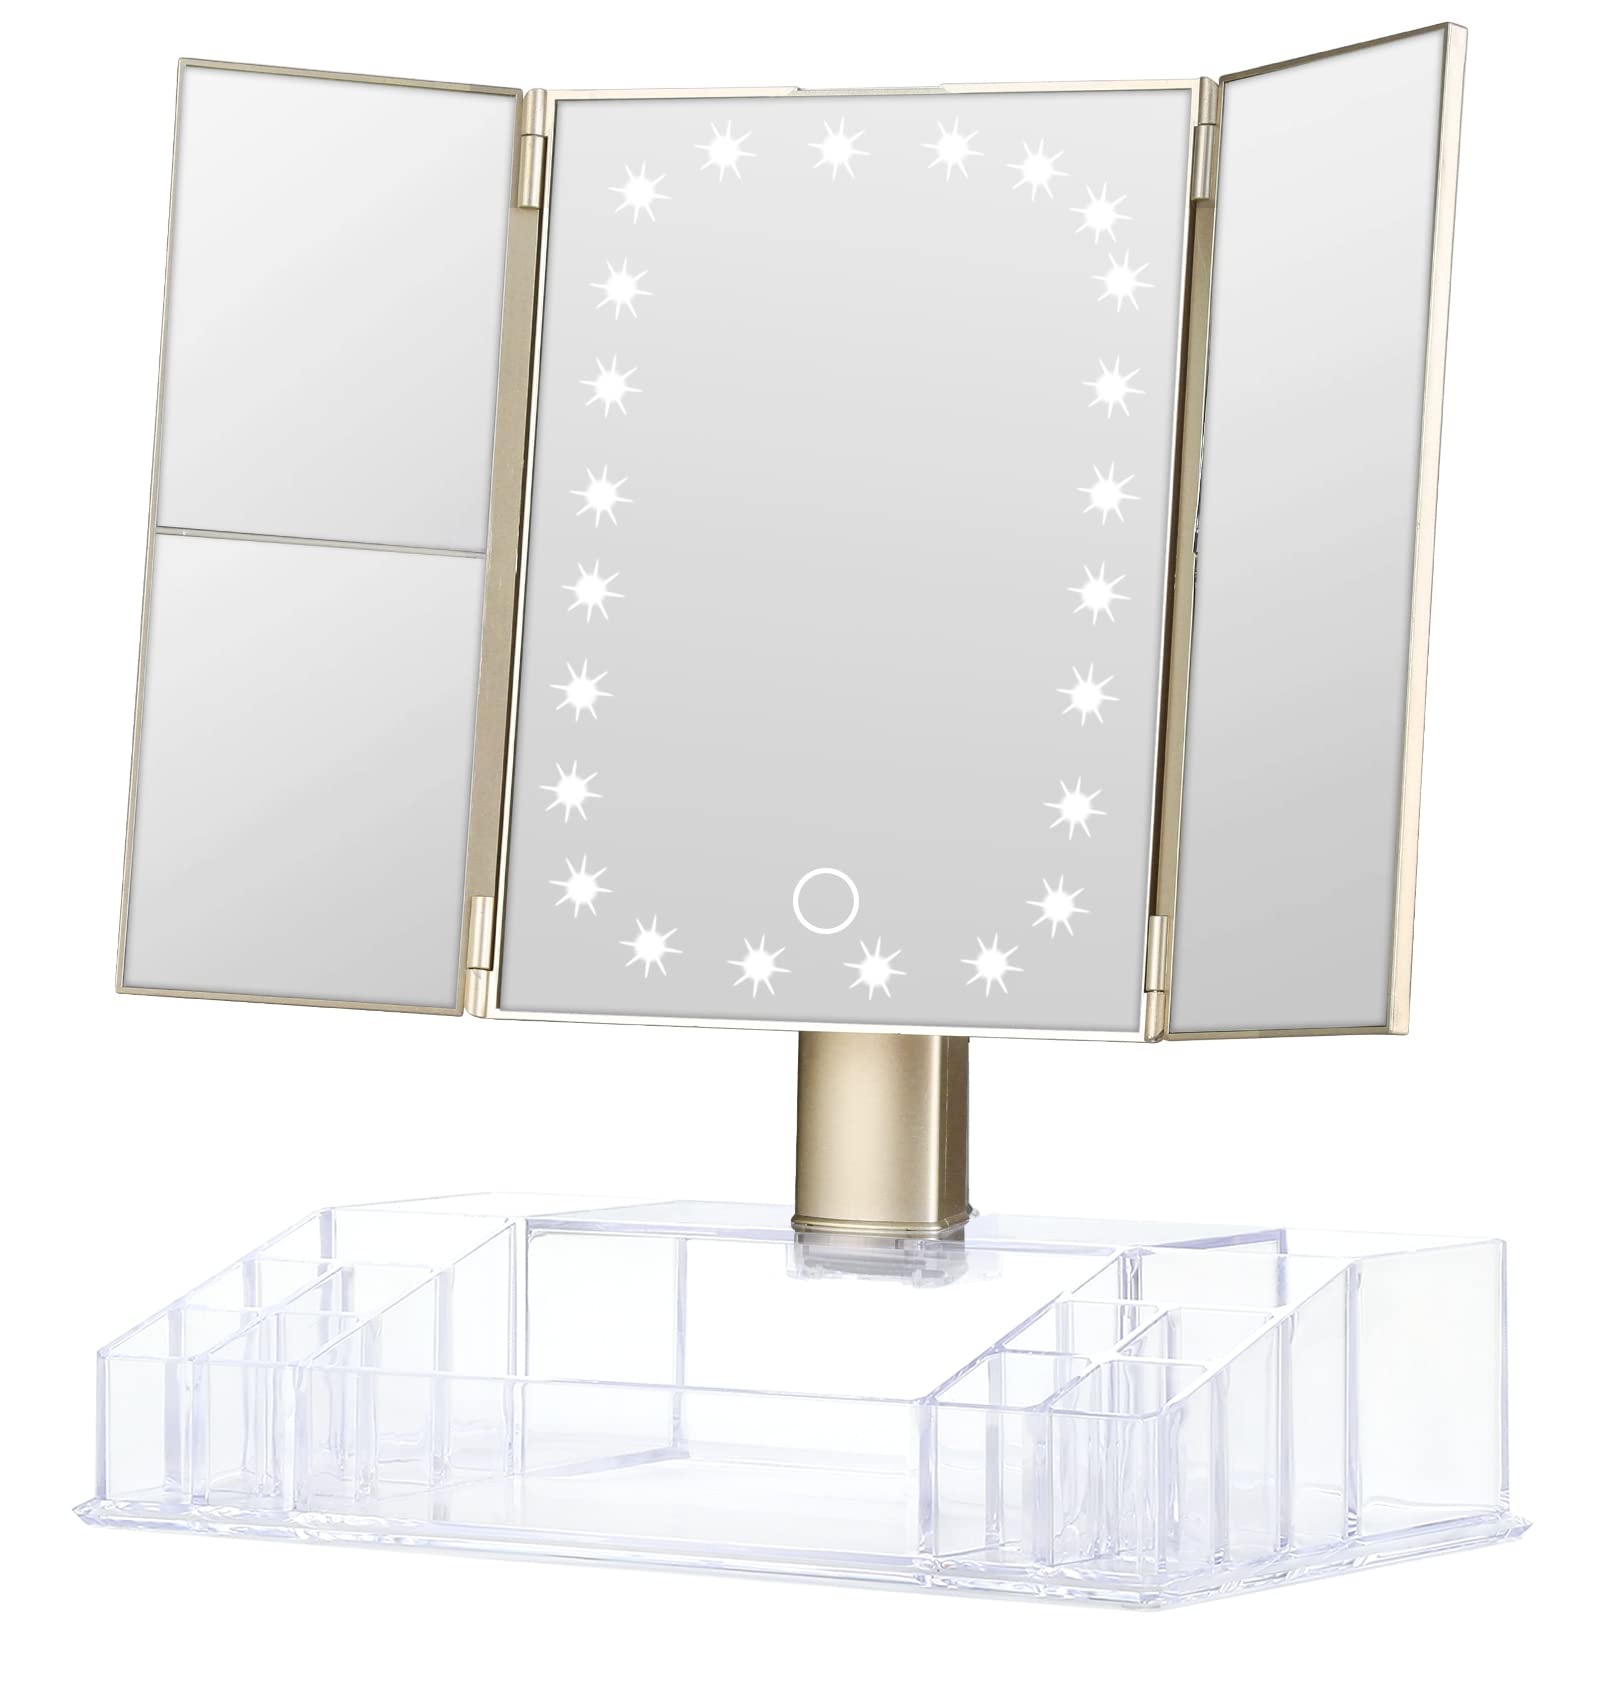 gULAURI Makeup Mirror - Lighted Makeup Mirror with Lights and Magnification, 3x2x Magnifying, Tri-Fold cosmetic Vanity Mirror wi